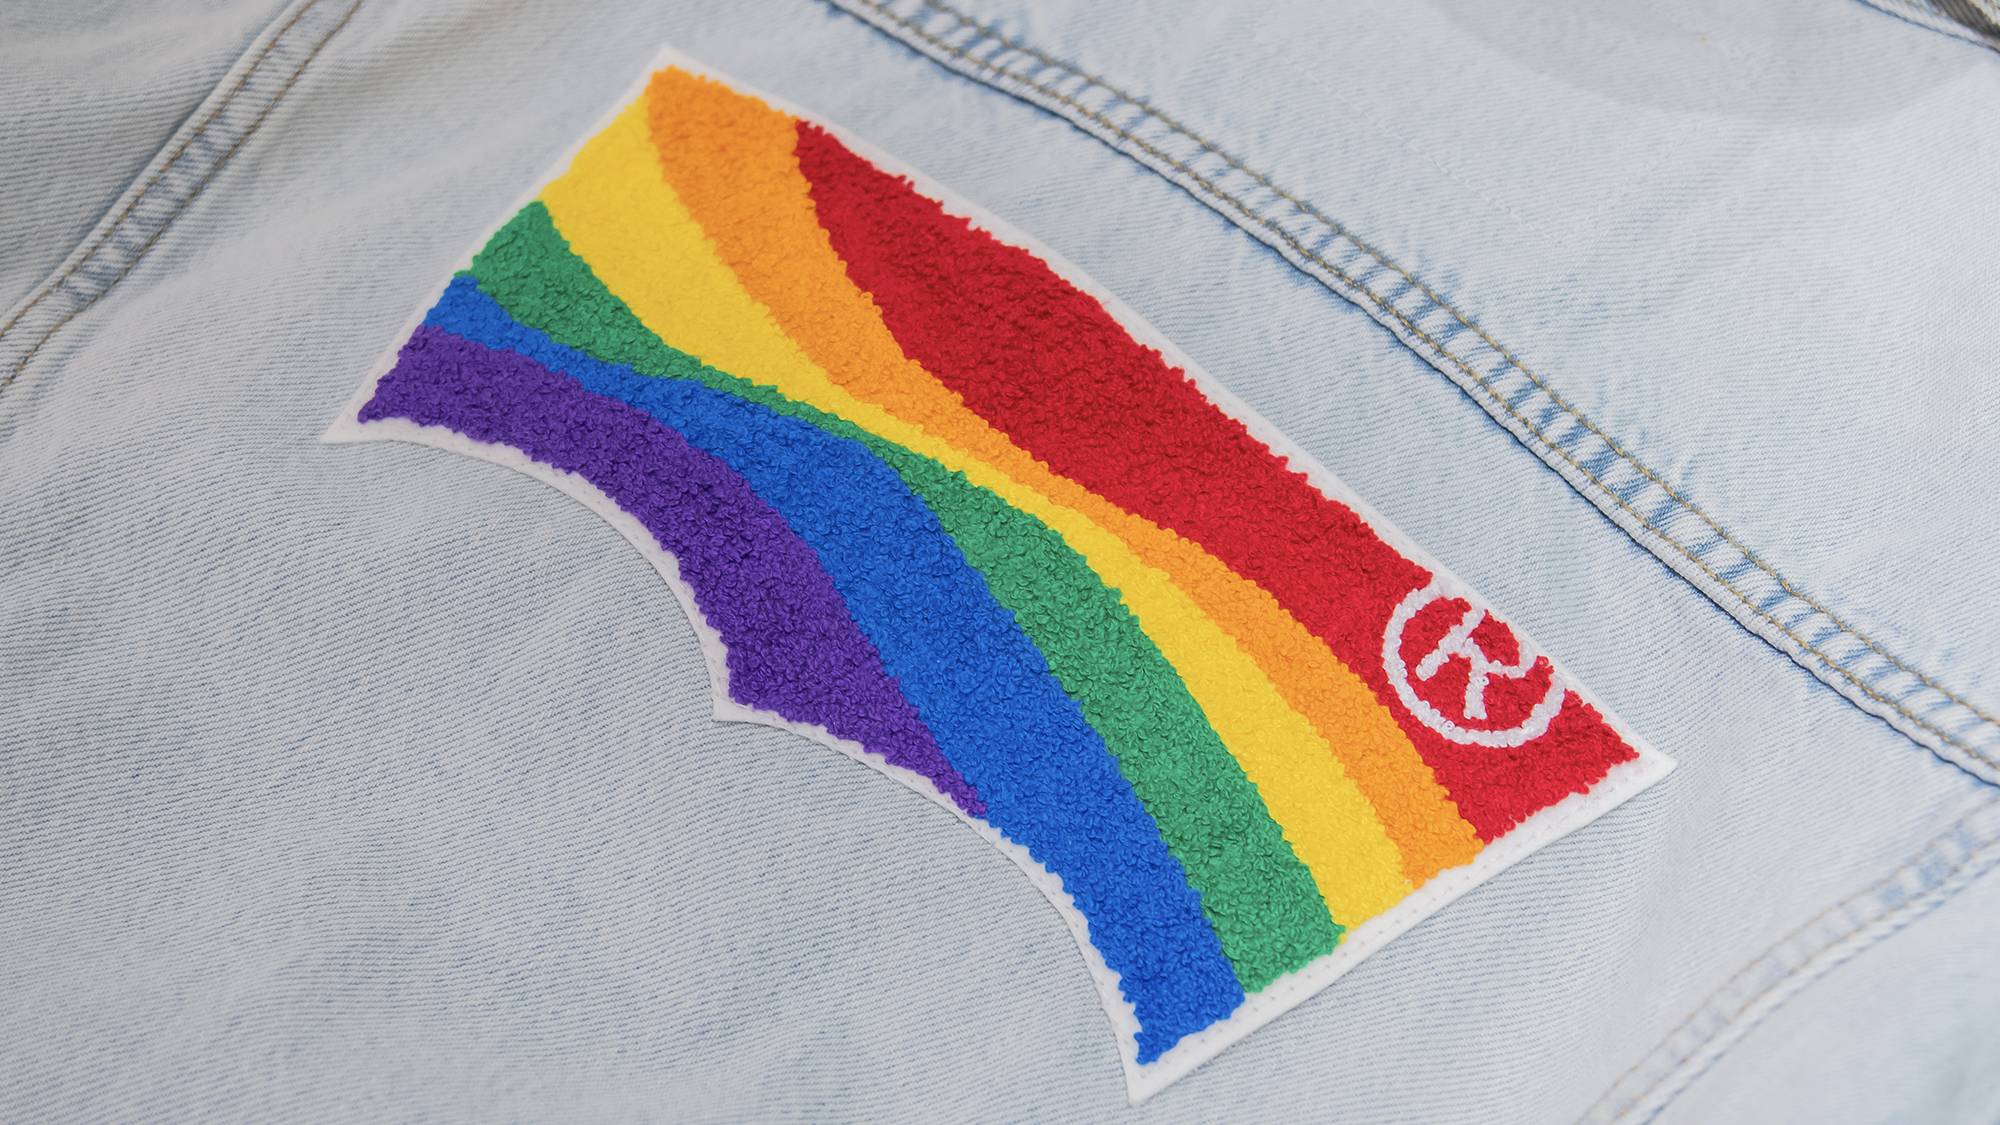 the levi's logo with the rainbow colors